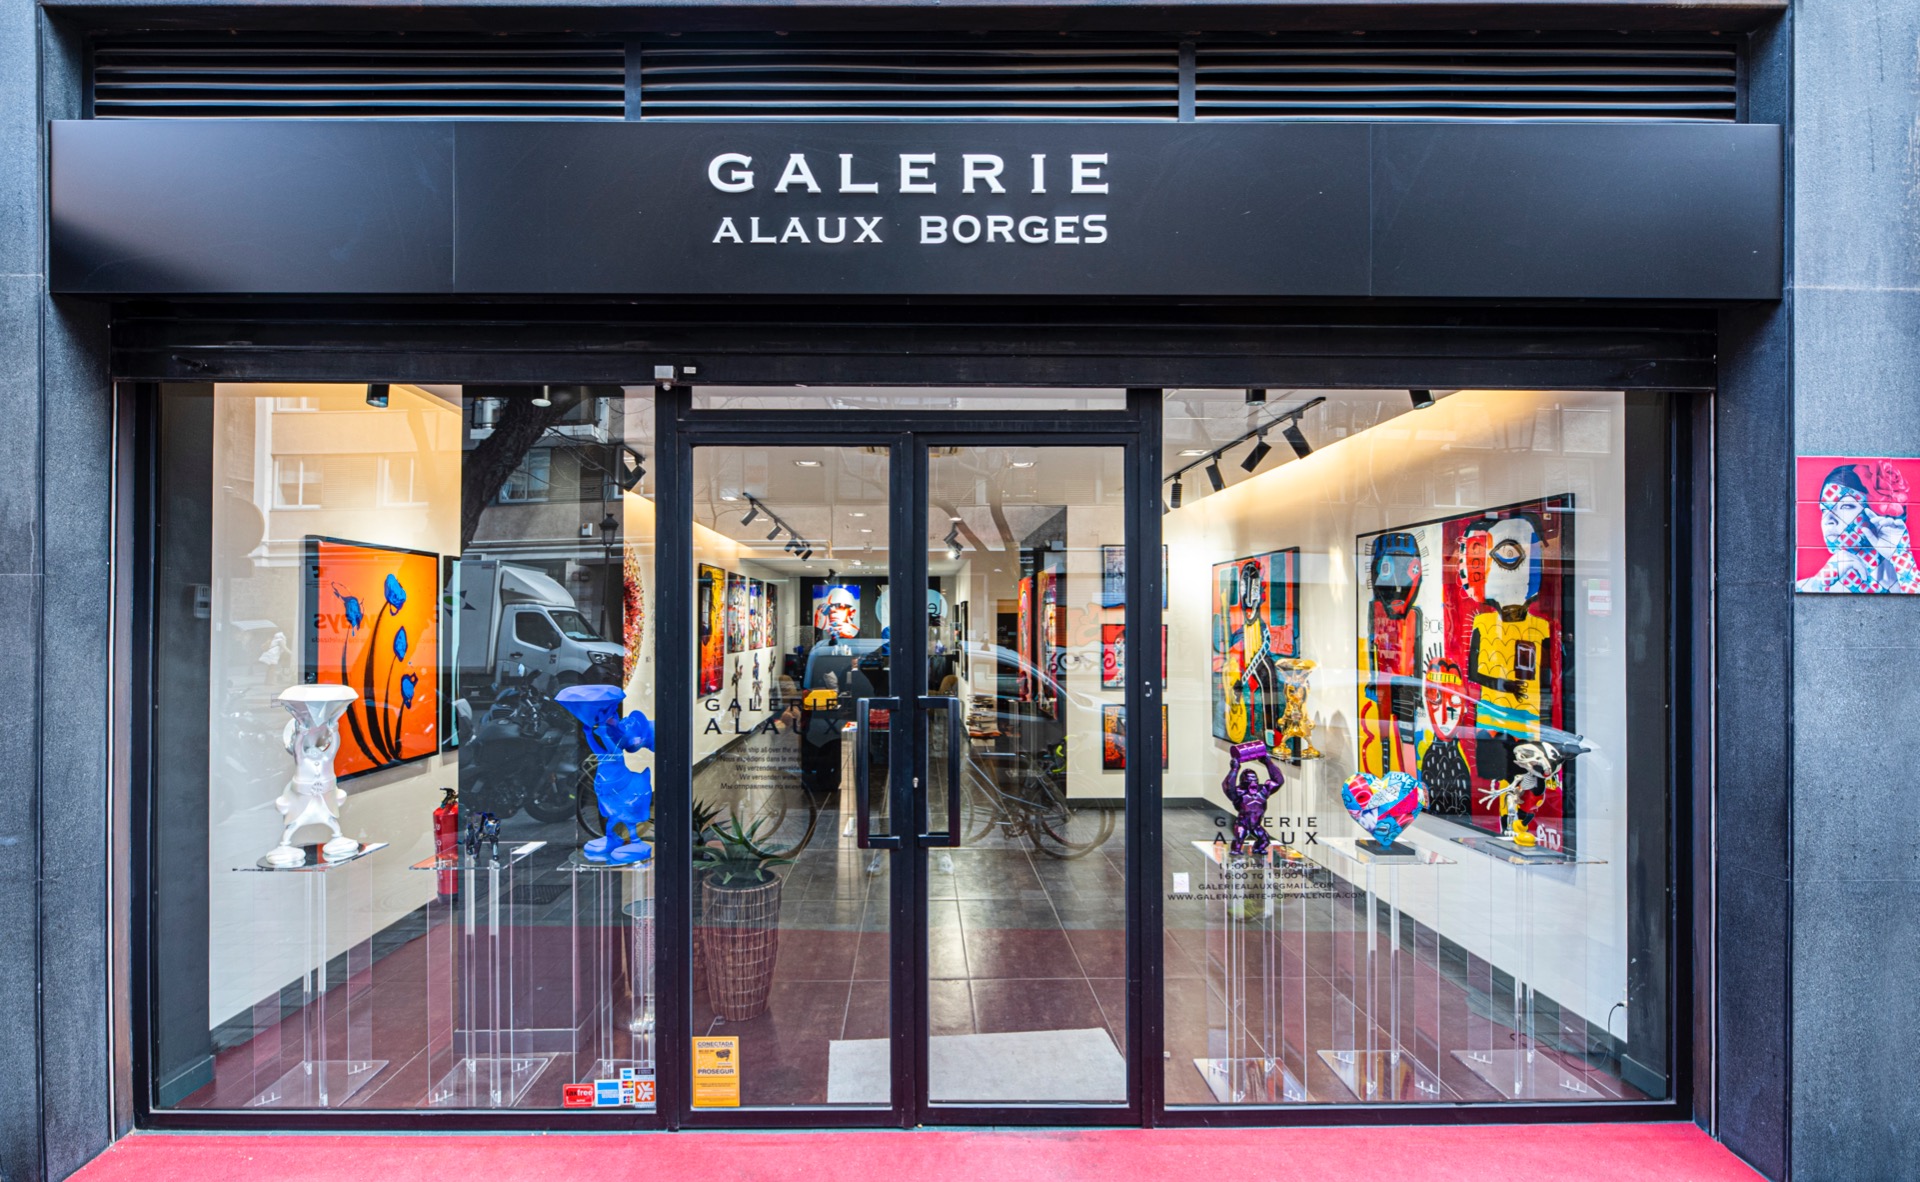 Launch of the Alaux Borges Gallery